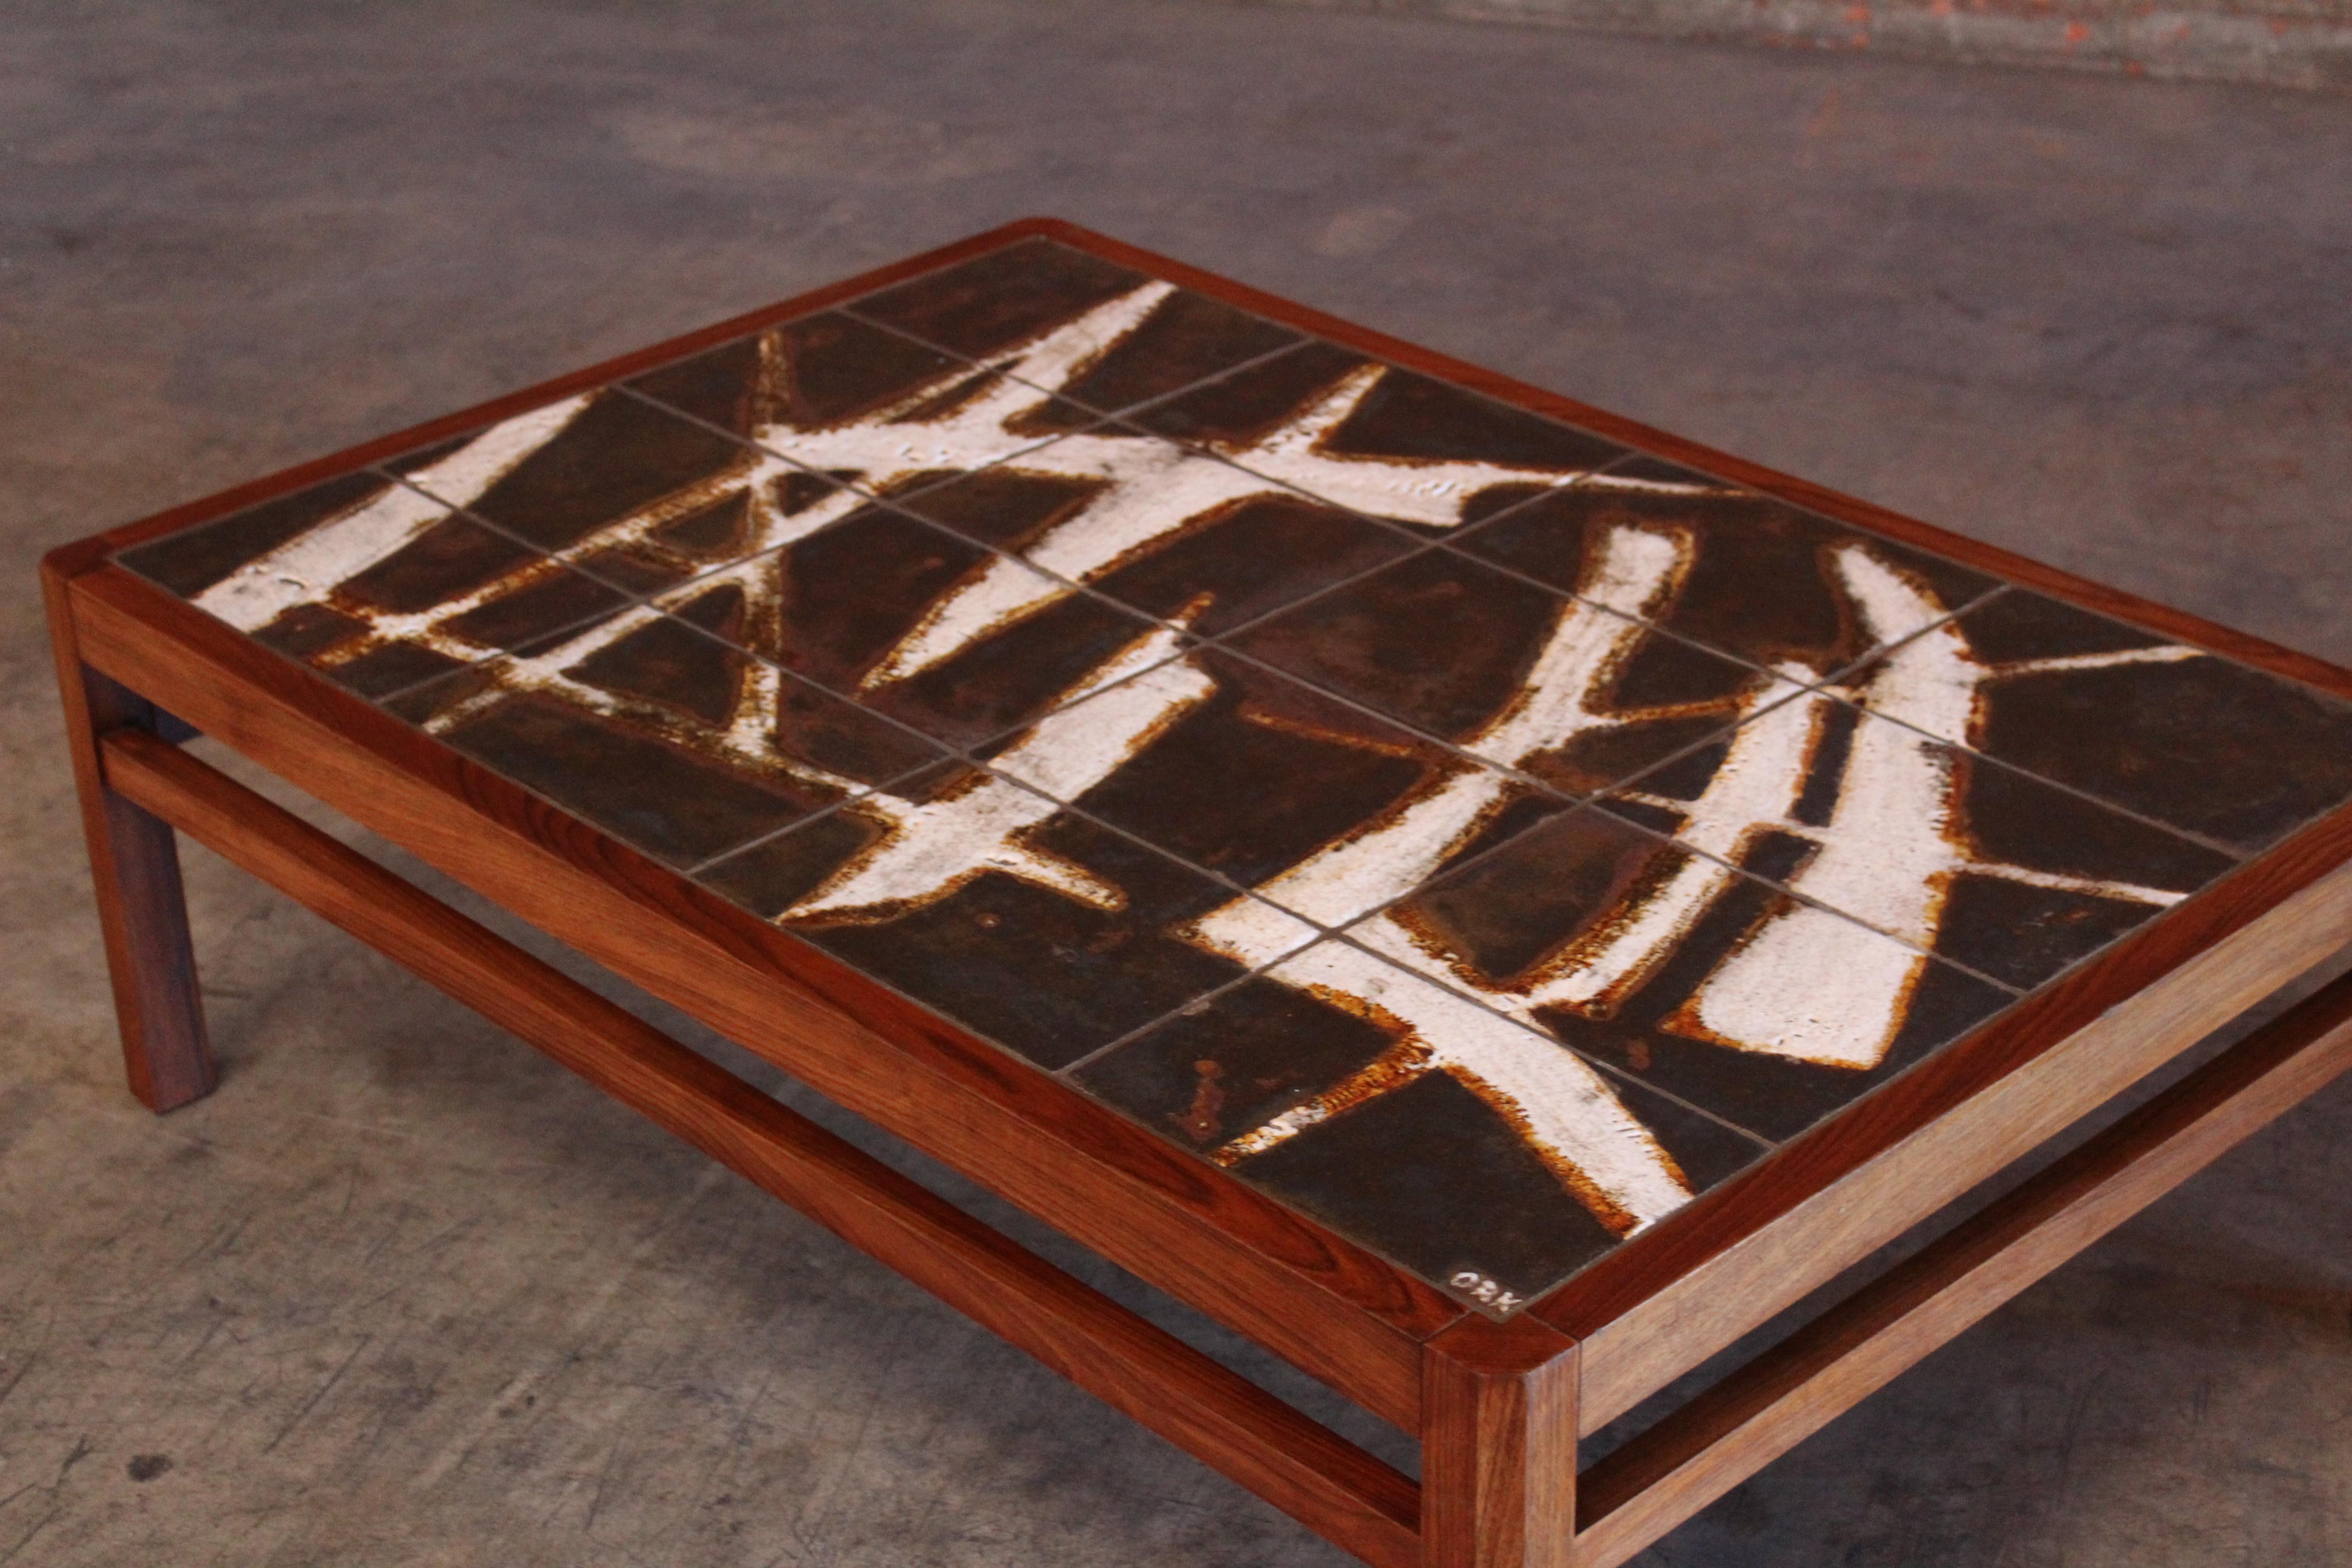 Danish Rosewood and Ceramic Tile Coffee Table by Ole Bjorn Krüger, 1960s For Sale 1